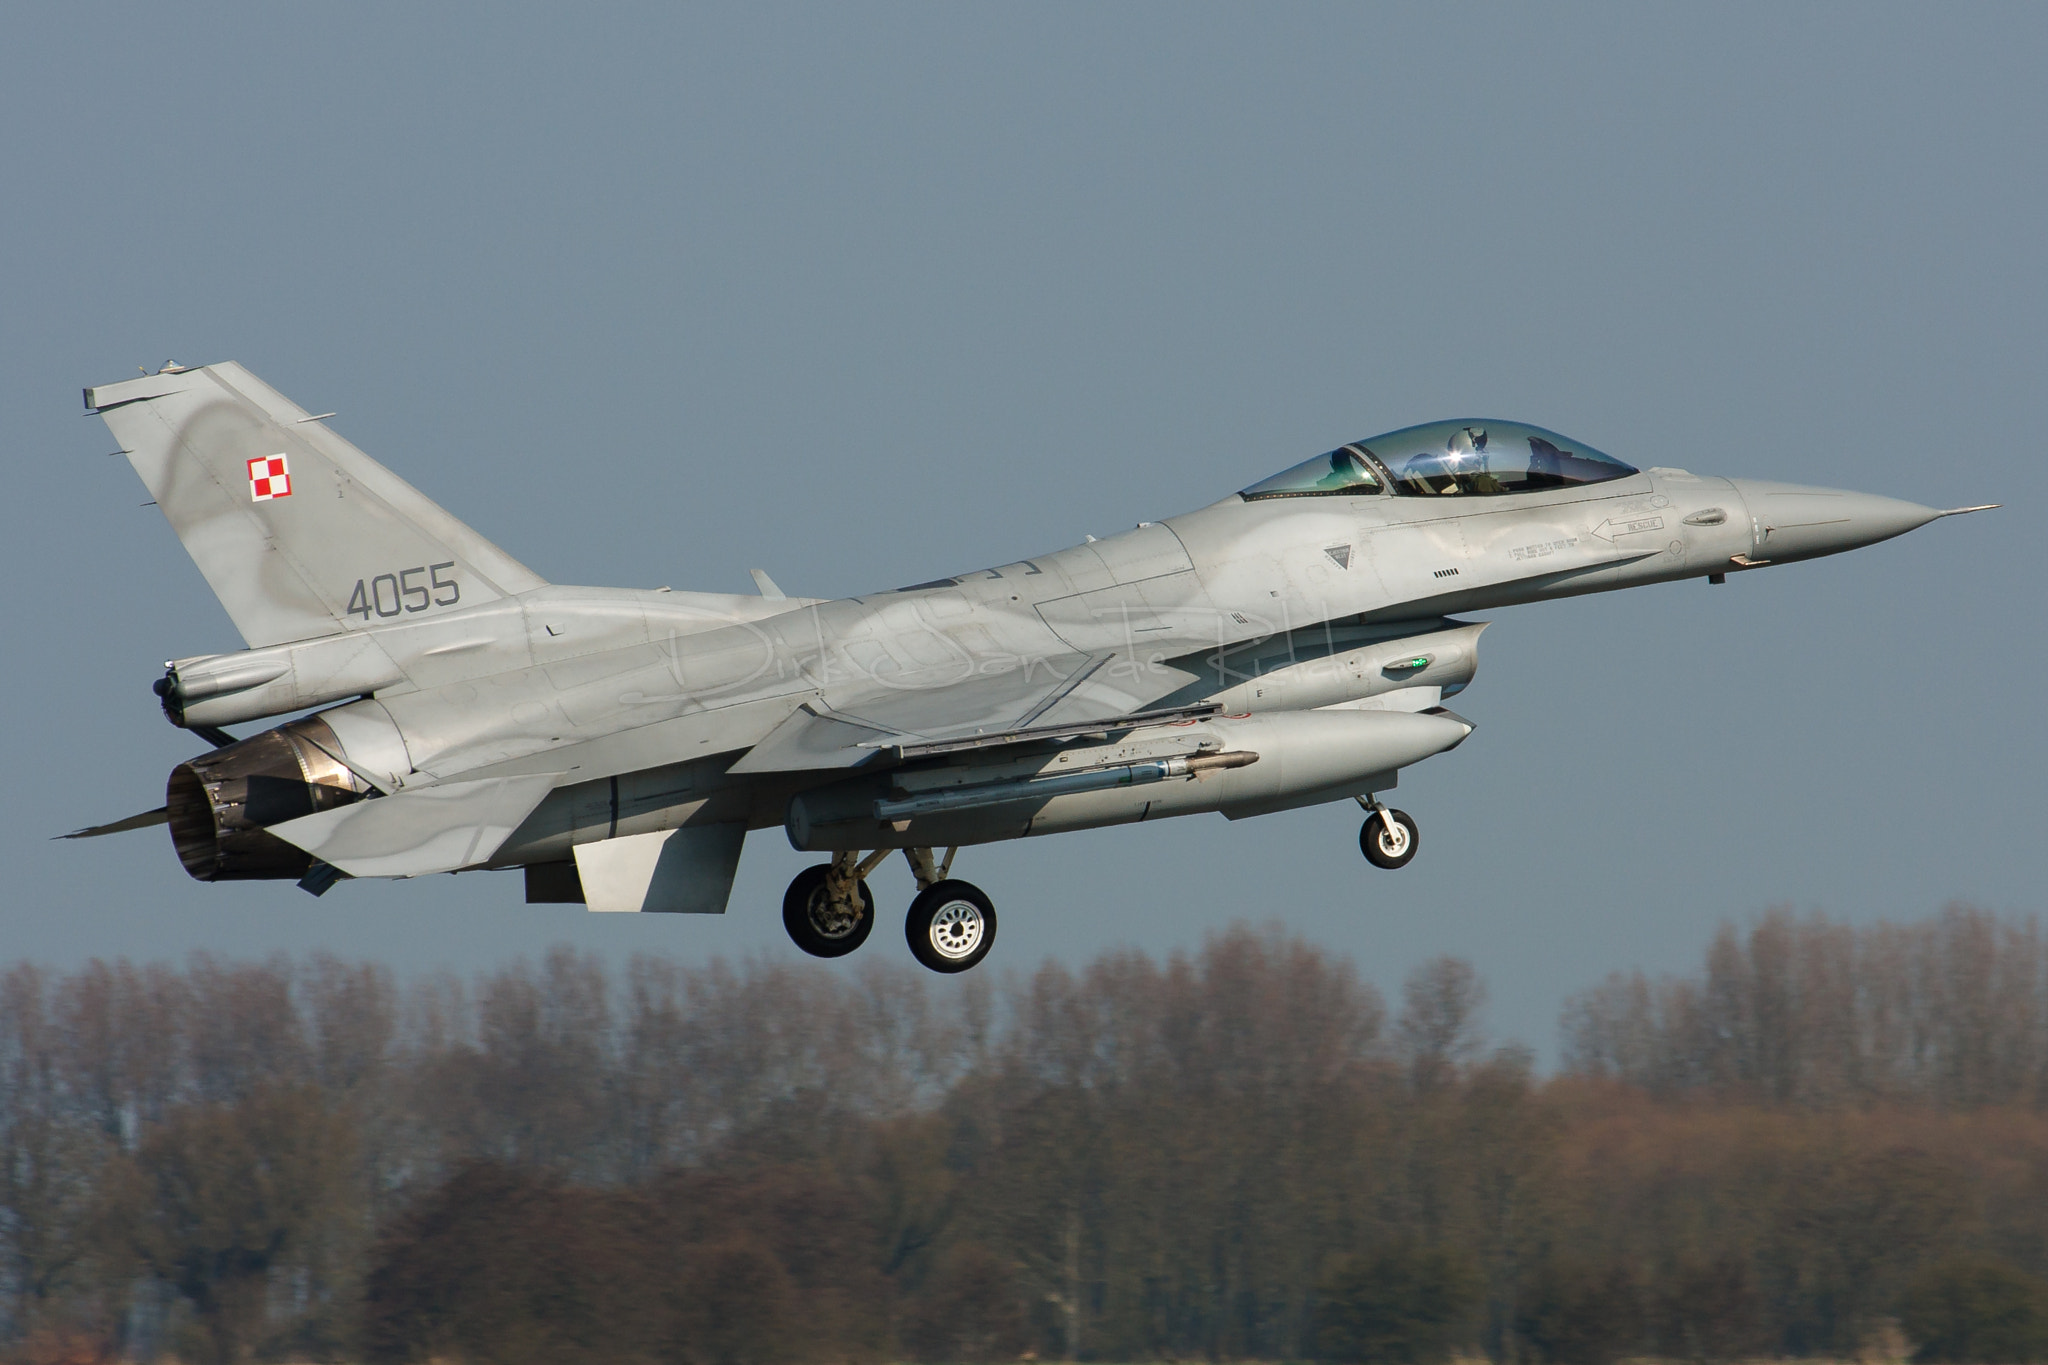 Canon EOS 40D sample photo. Polish air force f-16c fighting falcon 4055 photography